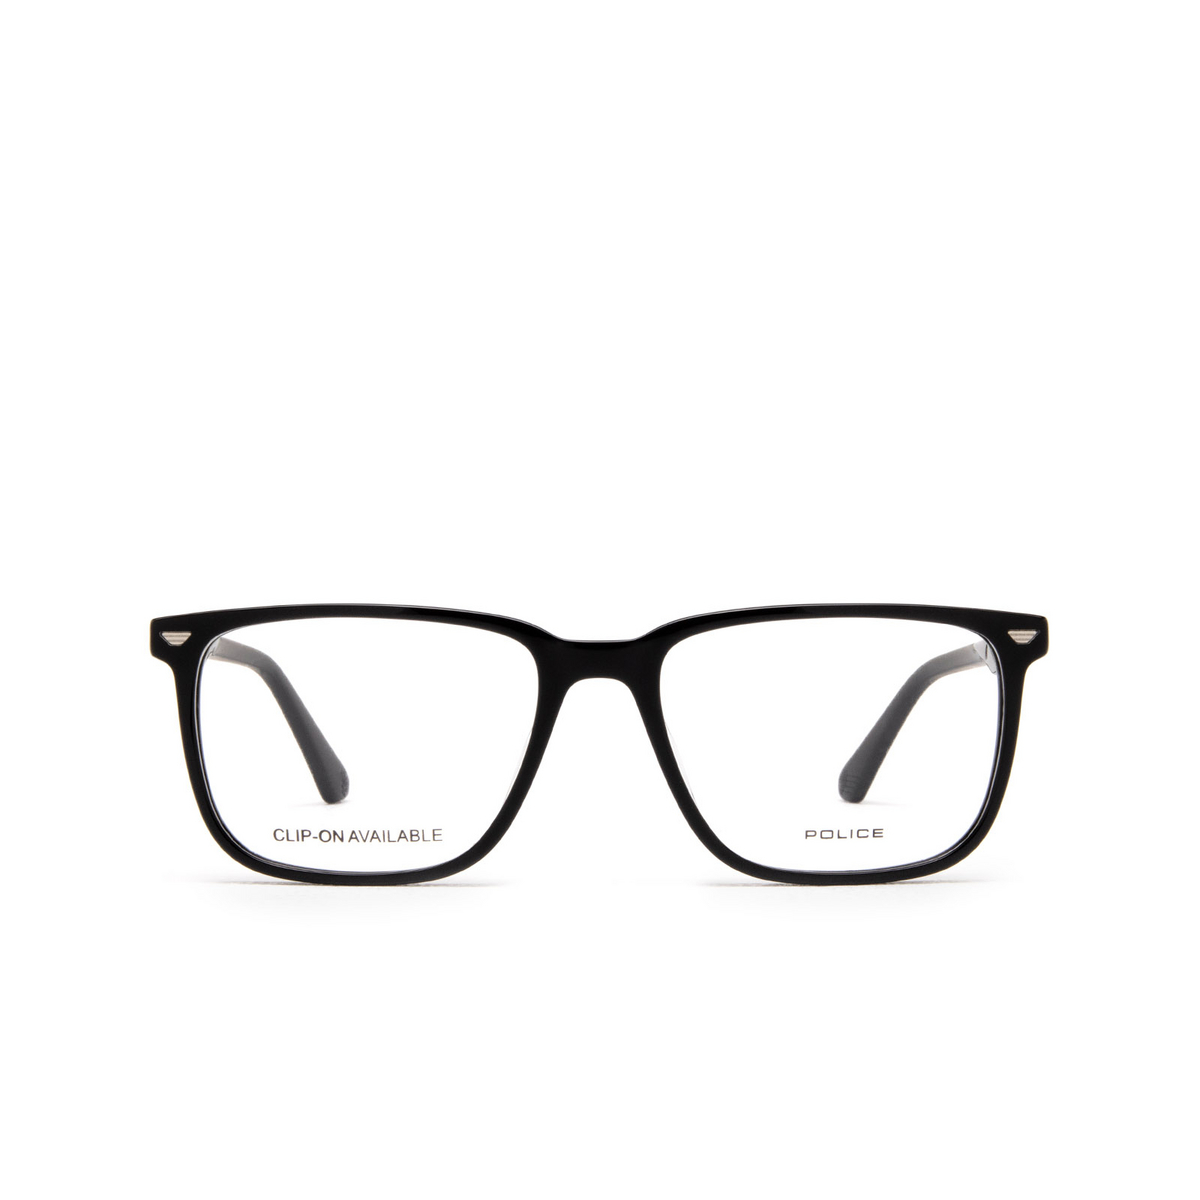 Police GROOVE 1 Eyeglasses 0700 Black - front view